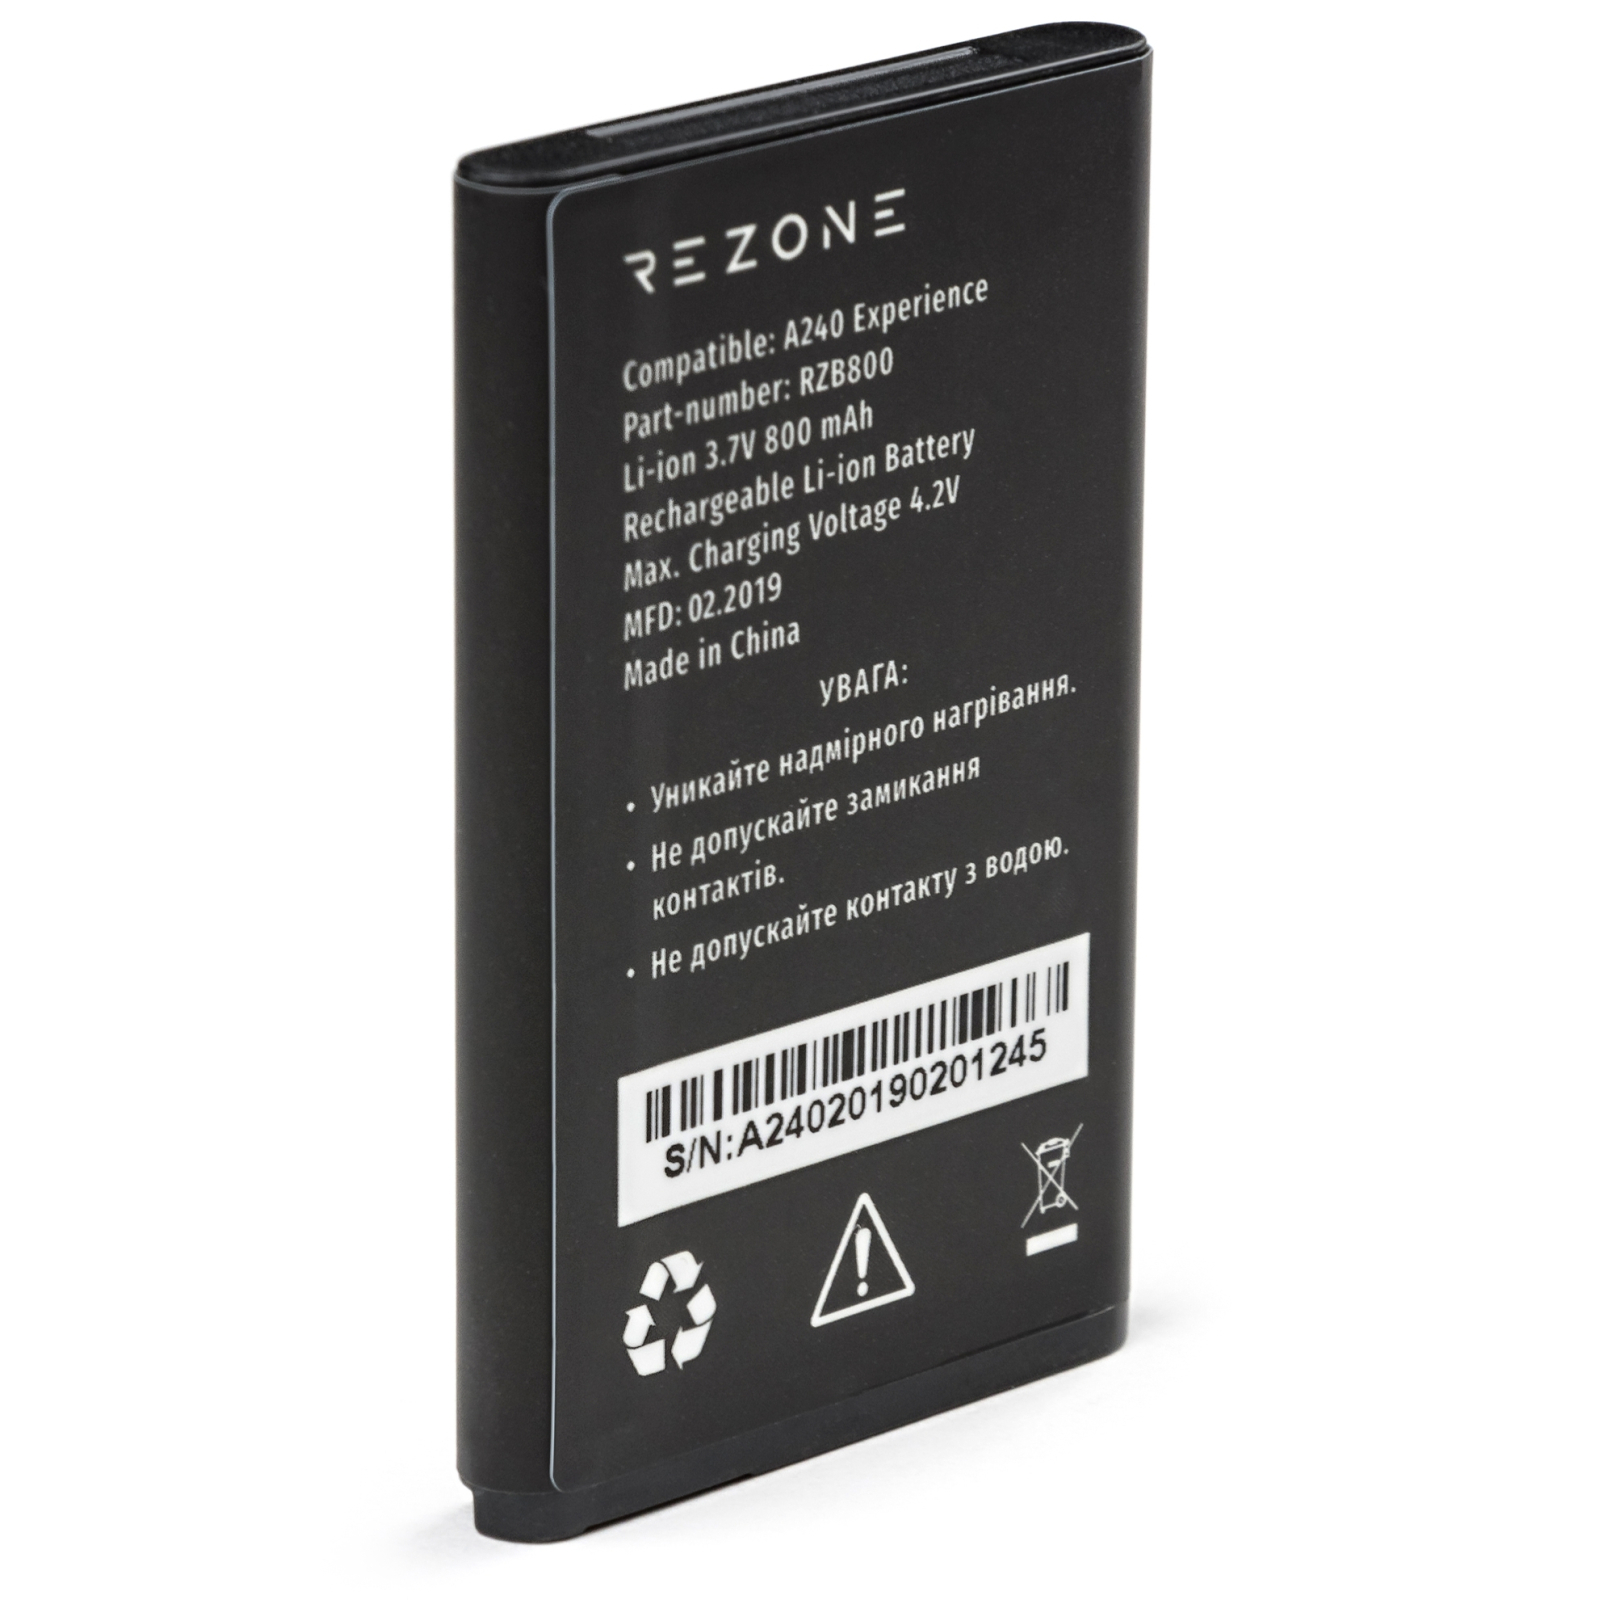 Акумуляторна батарея Rezone for A240 Experience 800mah (and all compatible with BL-5C) (BL-5C) зображення 2